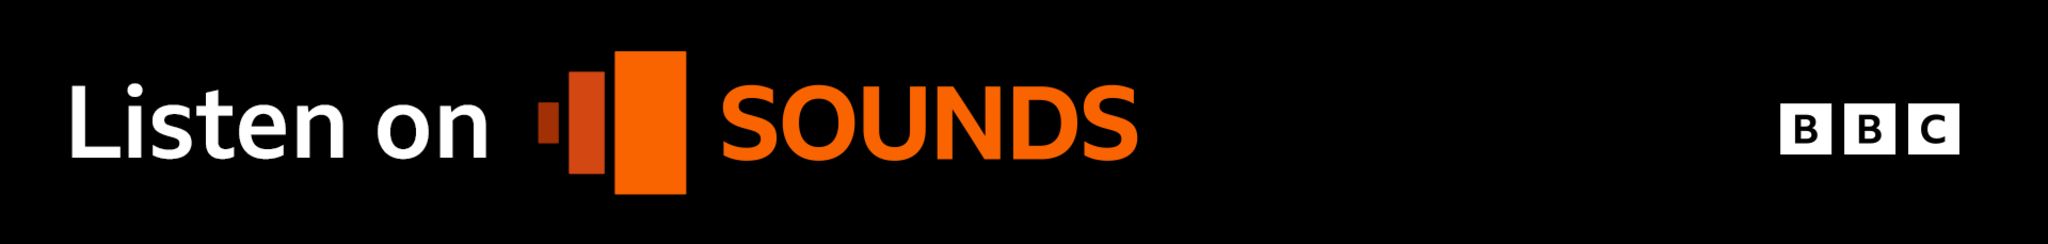 Sounds banner